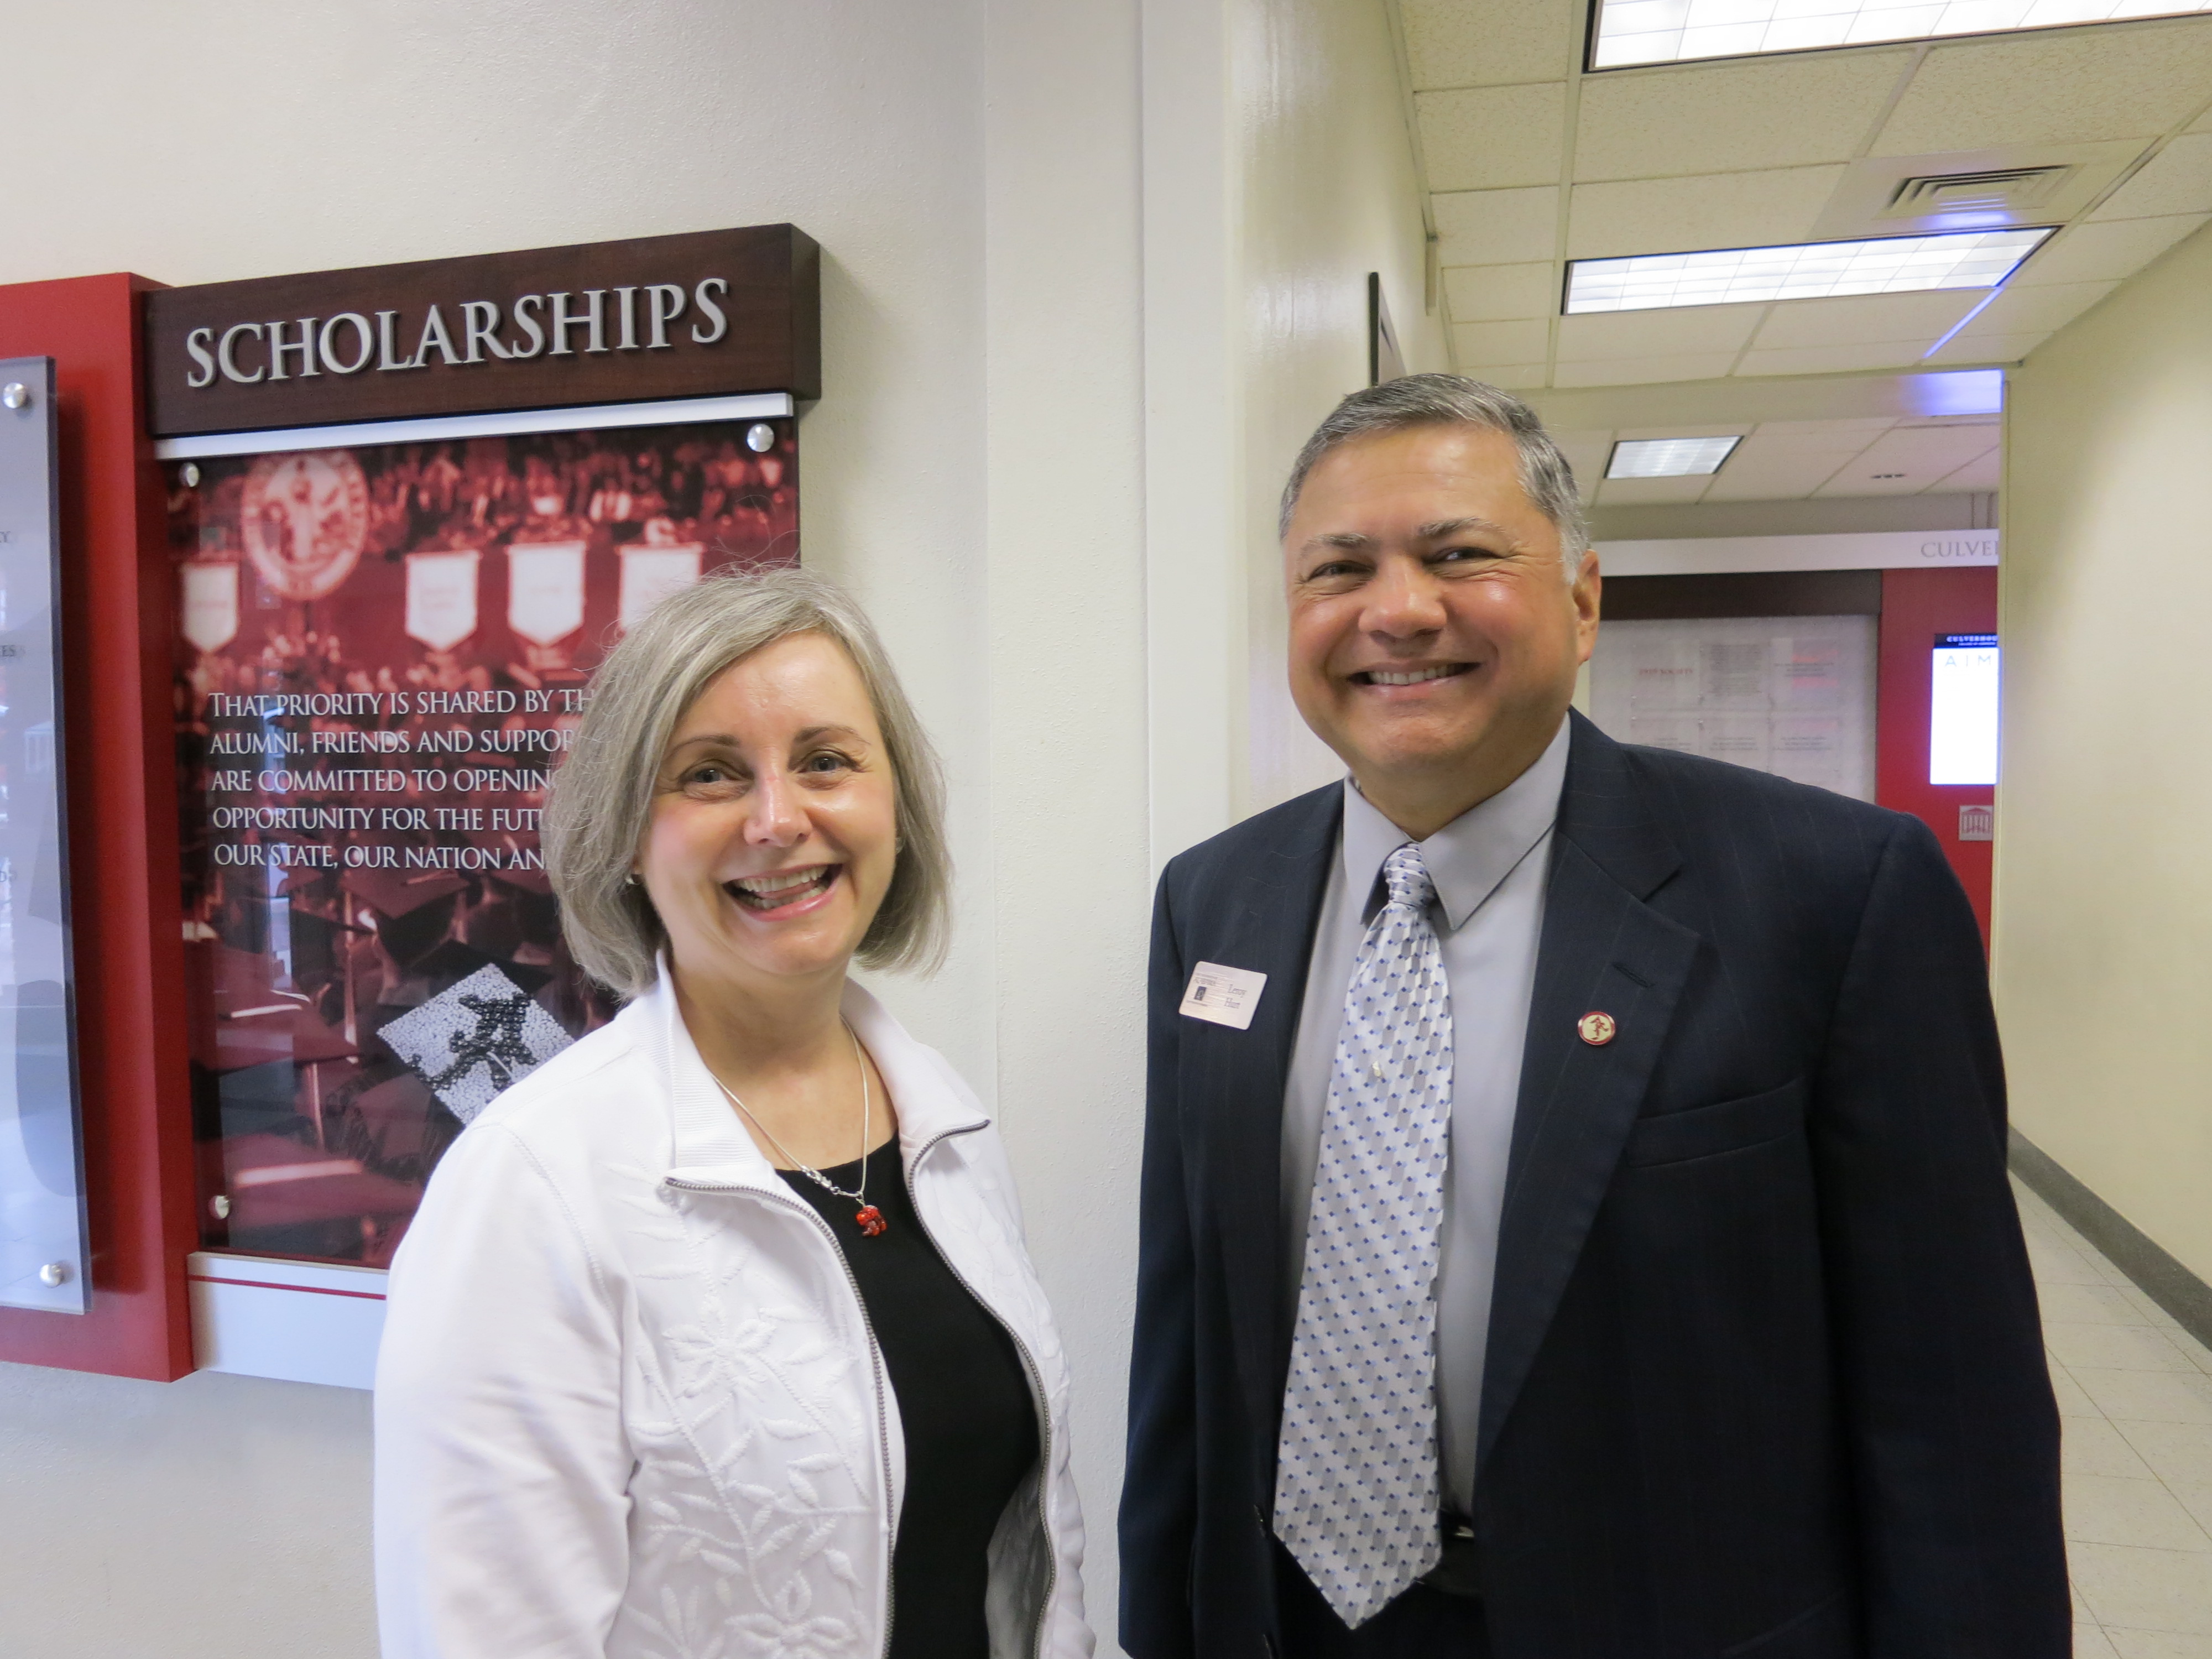 EMBA Program Director Donna Blackburn (left) and Associate Dean of the College of Continuing Studies Leroy Hurt (right)